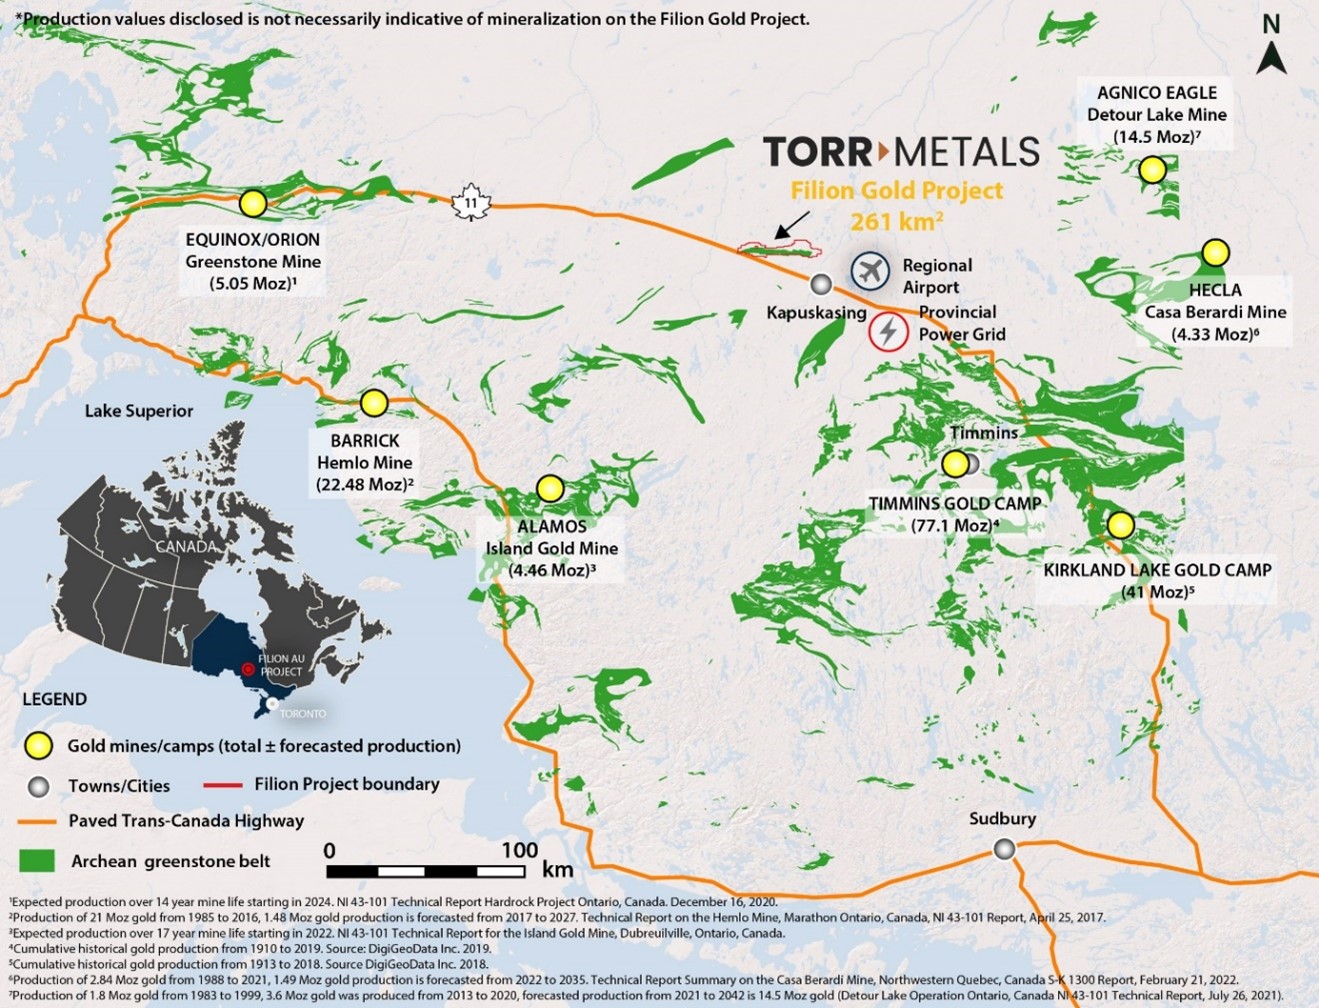 Located on the margins of the Wawa subprovince of northern Ontario, Figure 1 includes the positions as well as total historical and forecasted production of major regional gold mines within established gold-endowed greenstone belts of the Wawa, Wabigoon, and Abitibi subprovinces.